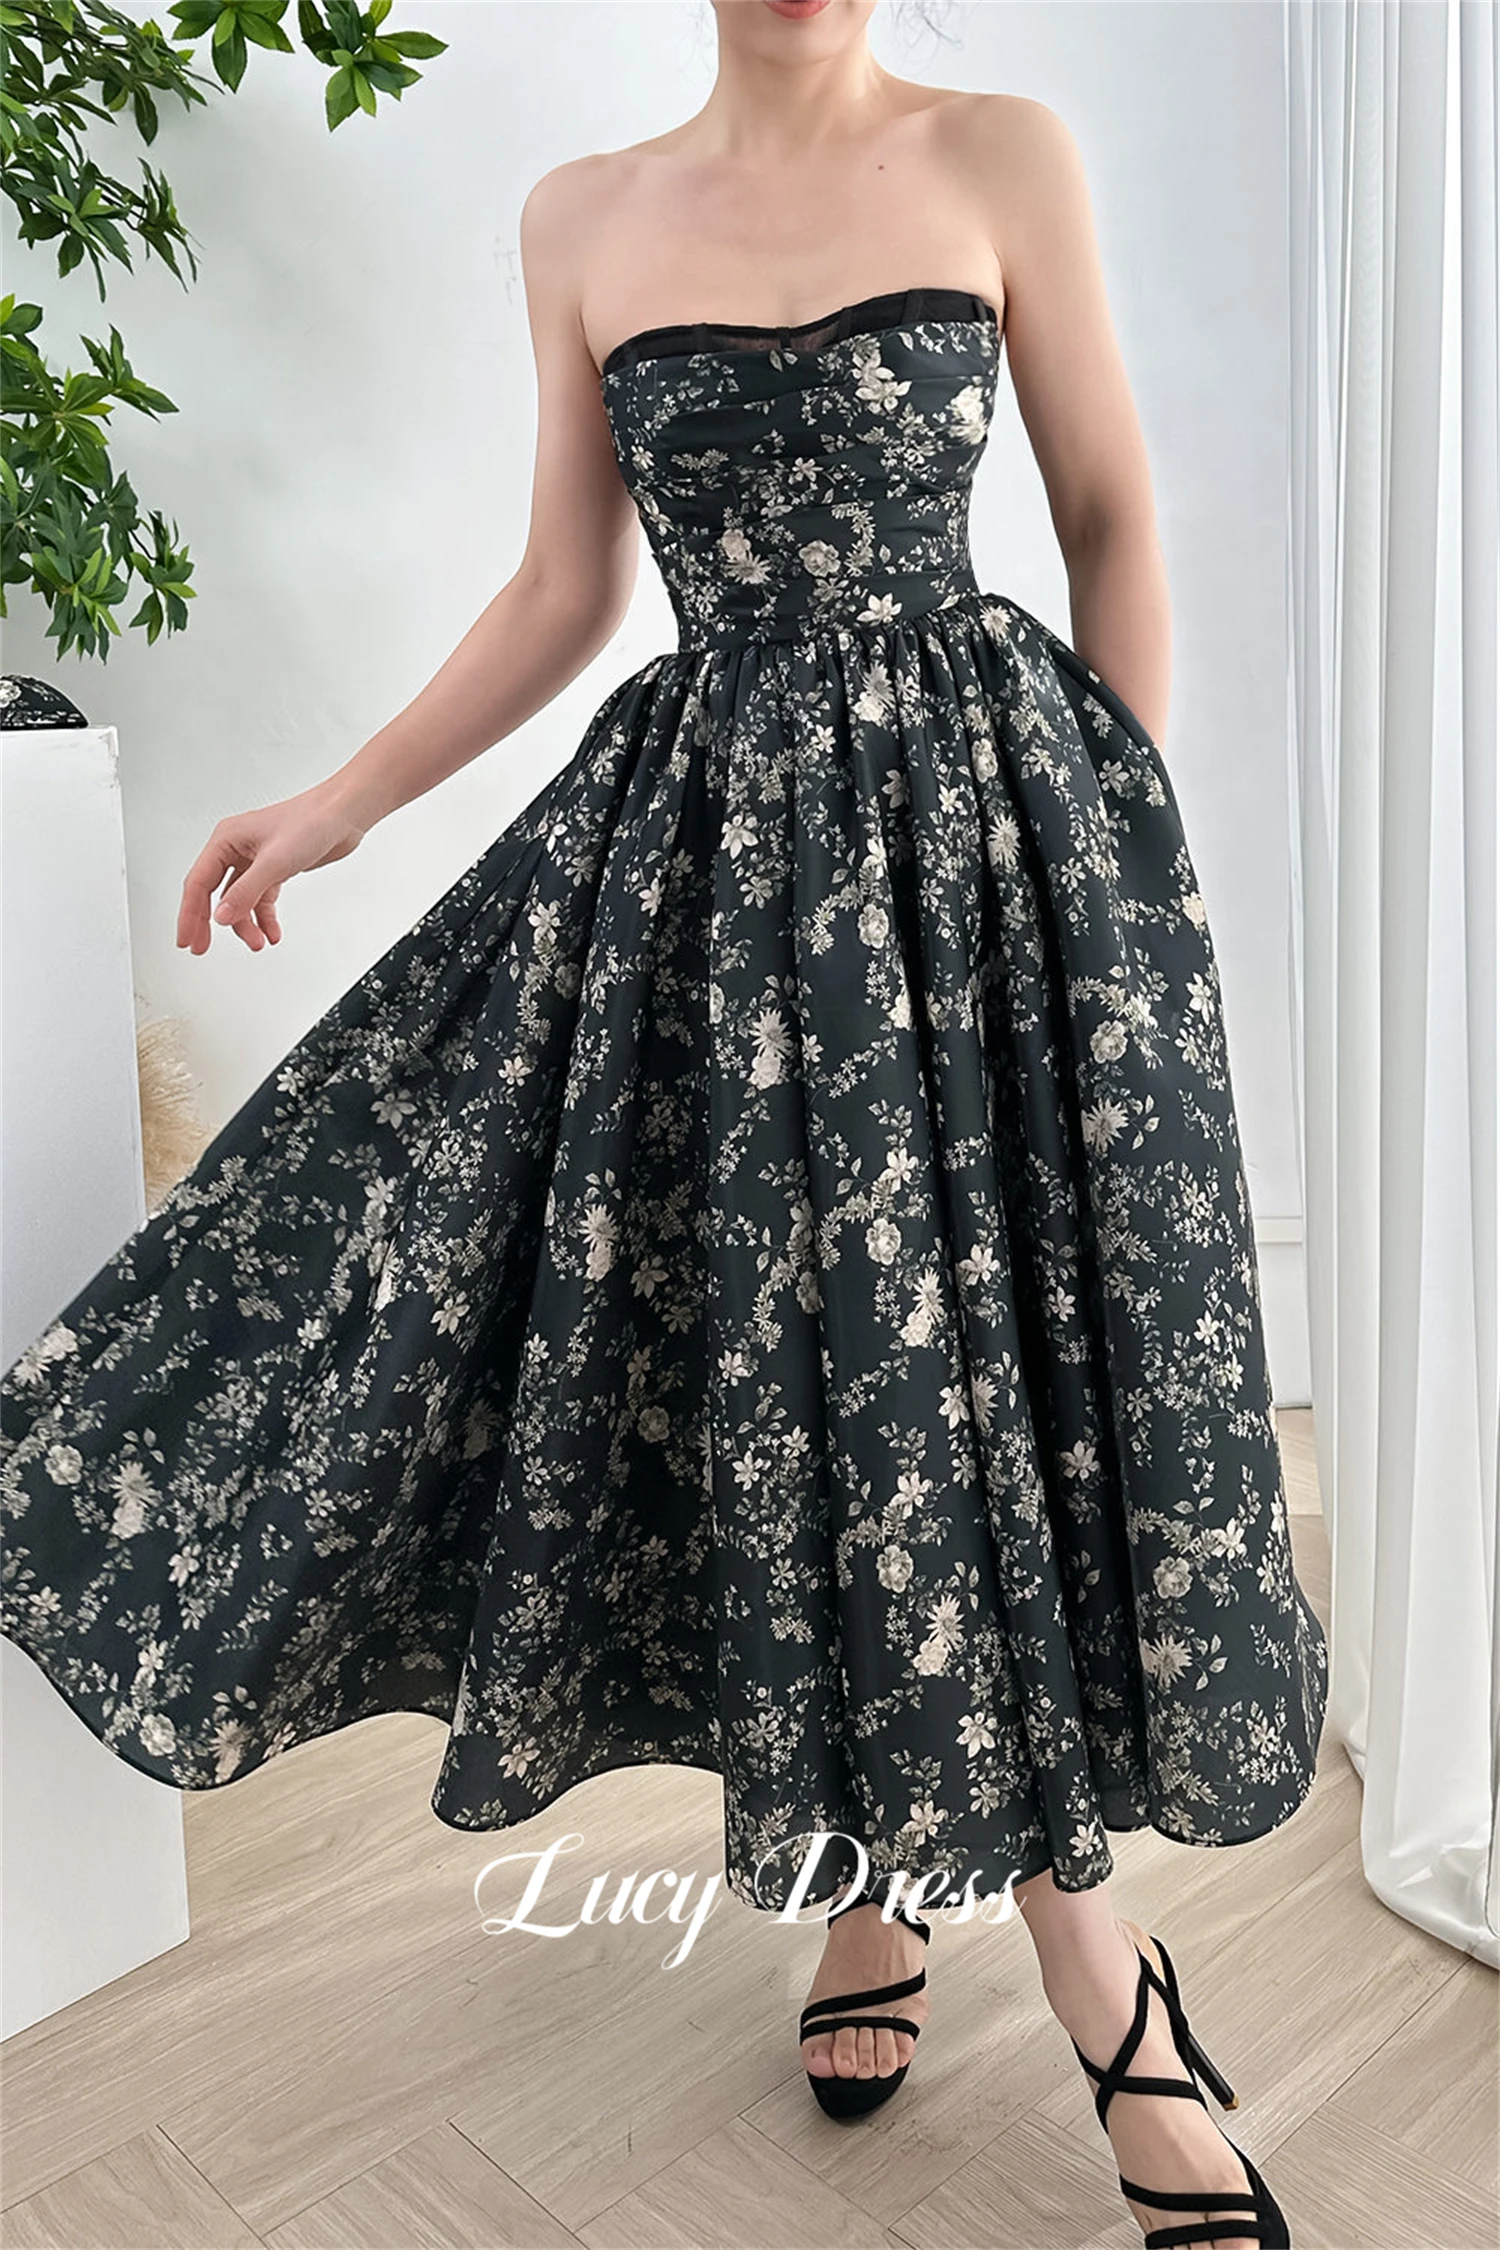 

Lucy Woman Party Dress Graduation Gown Line A Pattern Fabric Evening Strapless Formal Occasion Dresses for Special Occasions